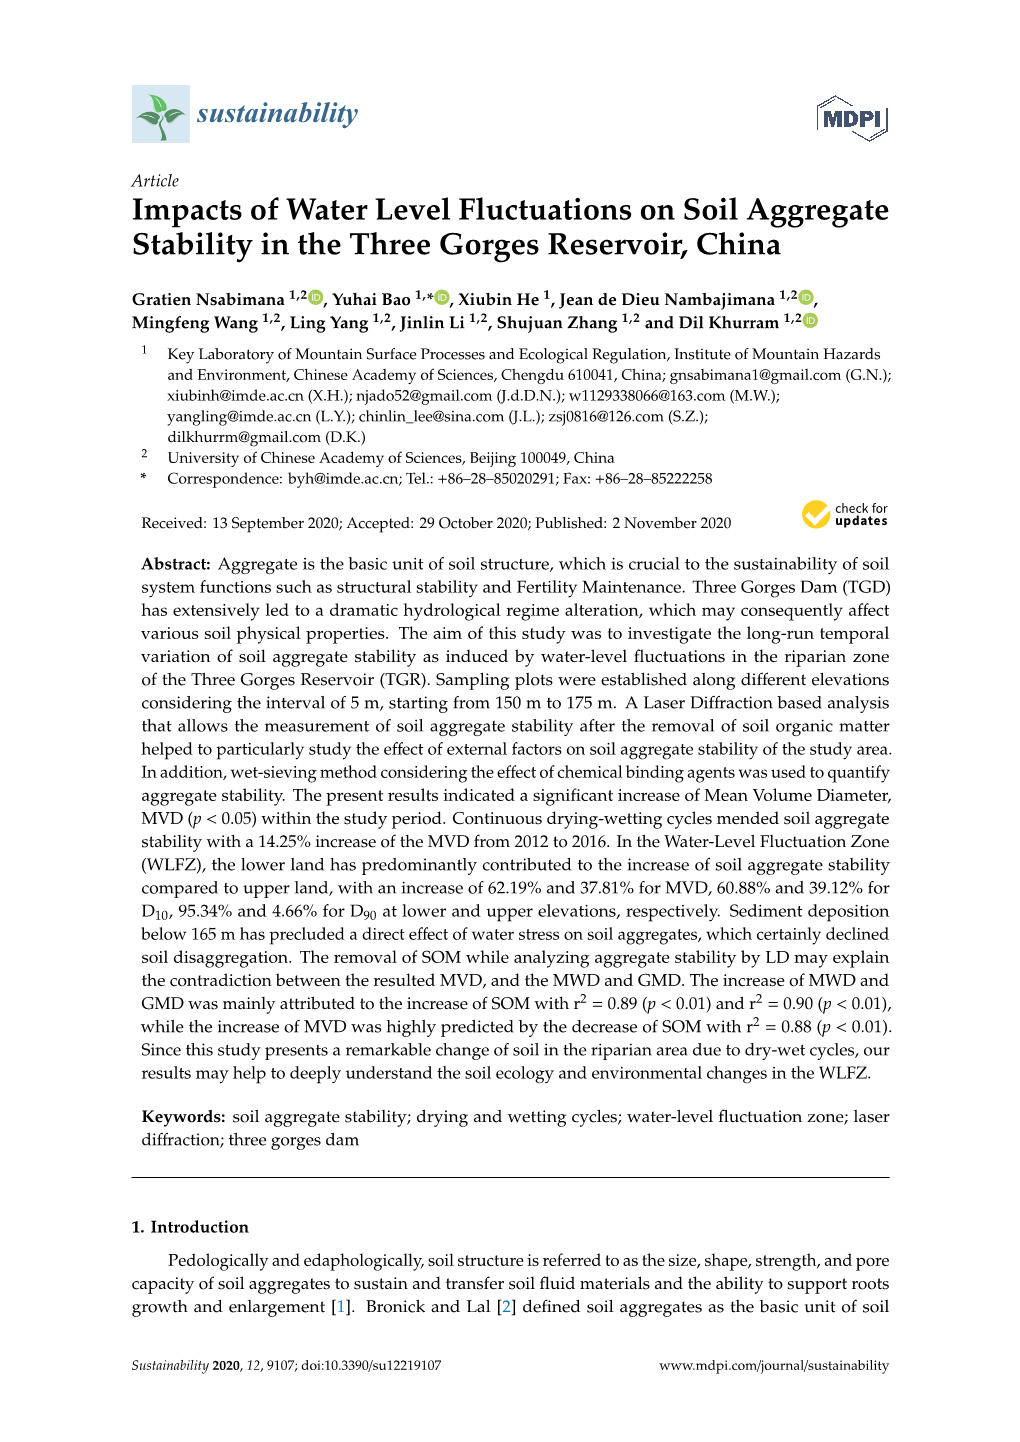 Impacts of Water Level Fluctuations on Soil Aggregate Stability in the Three Gorges Reservoir, China